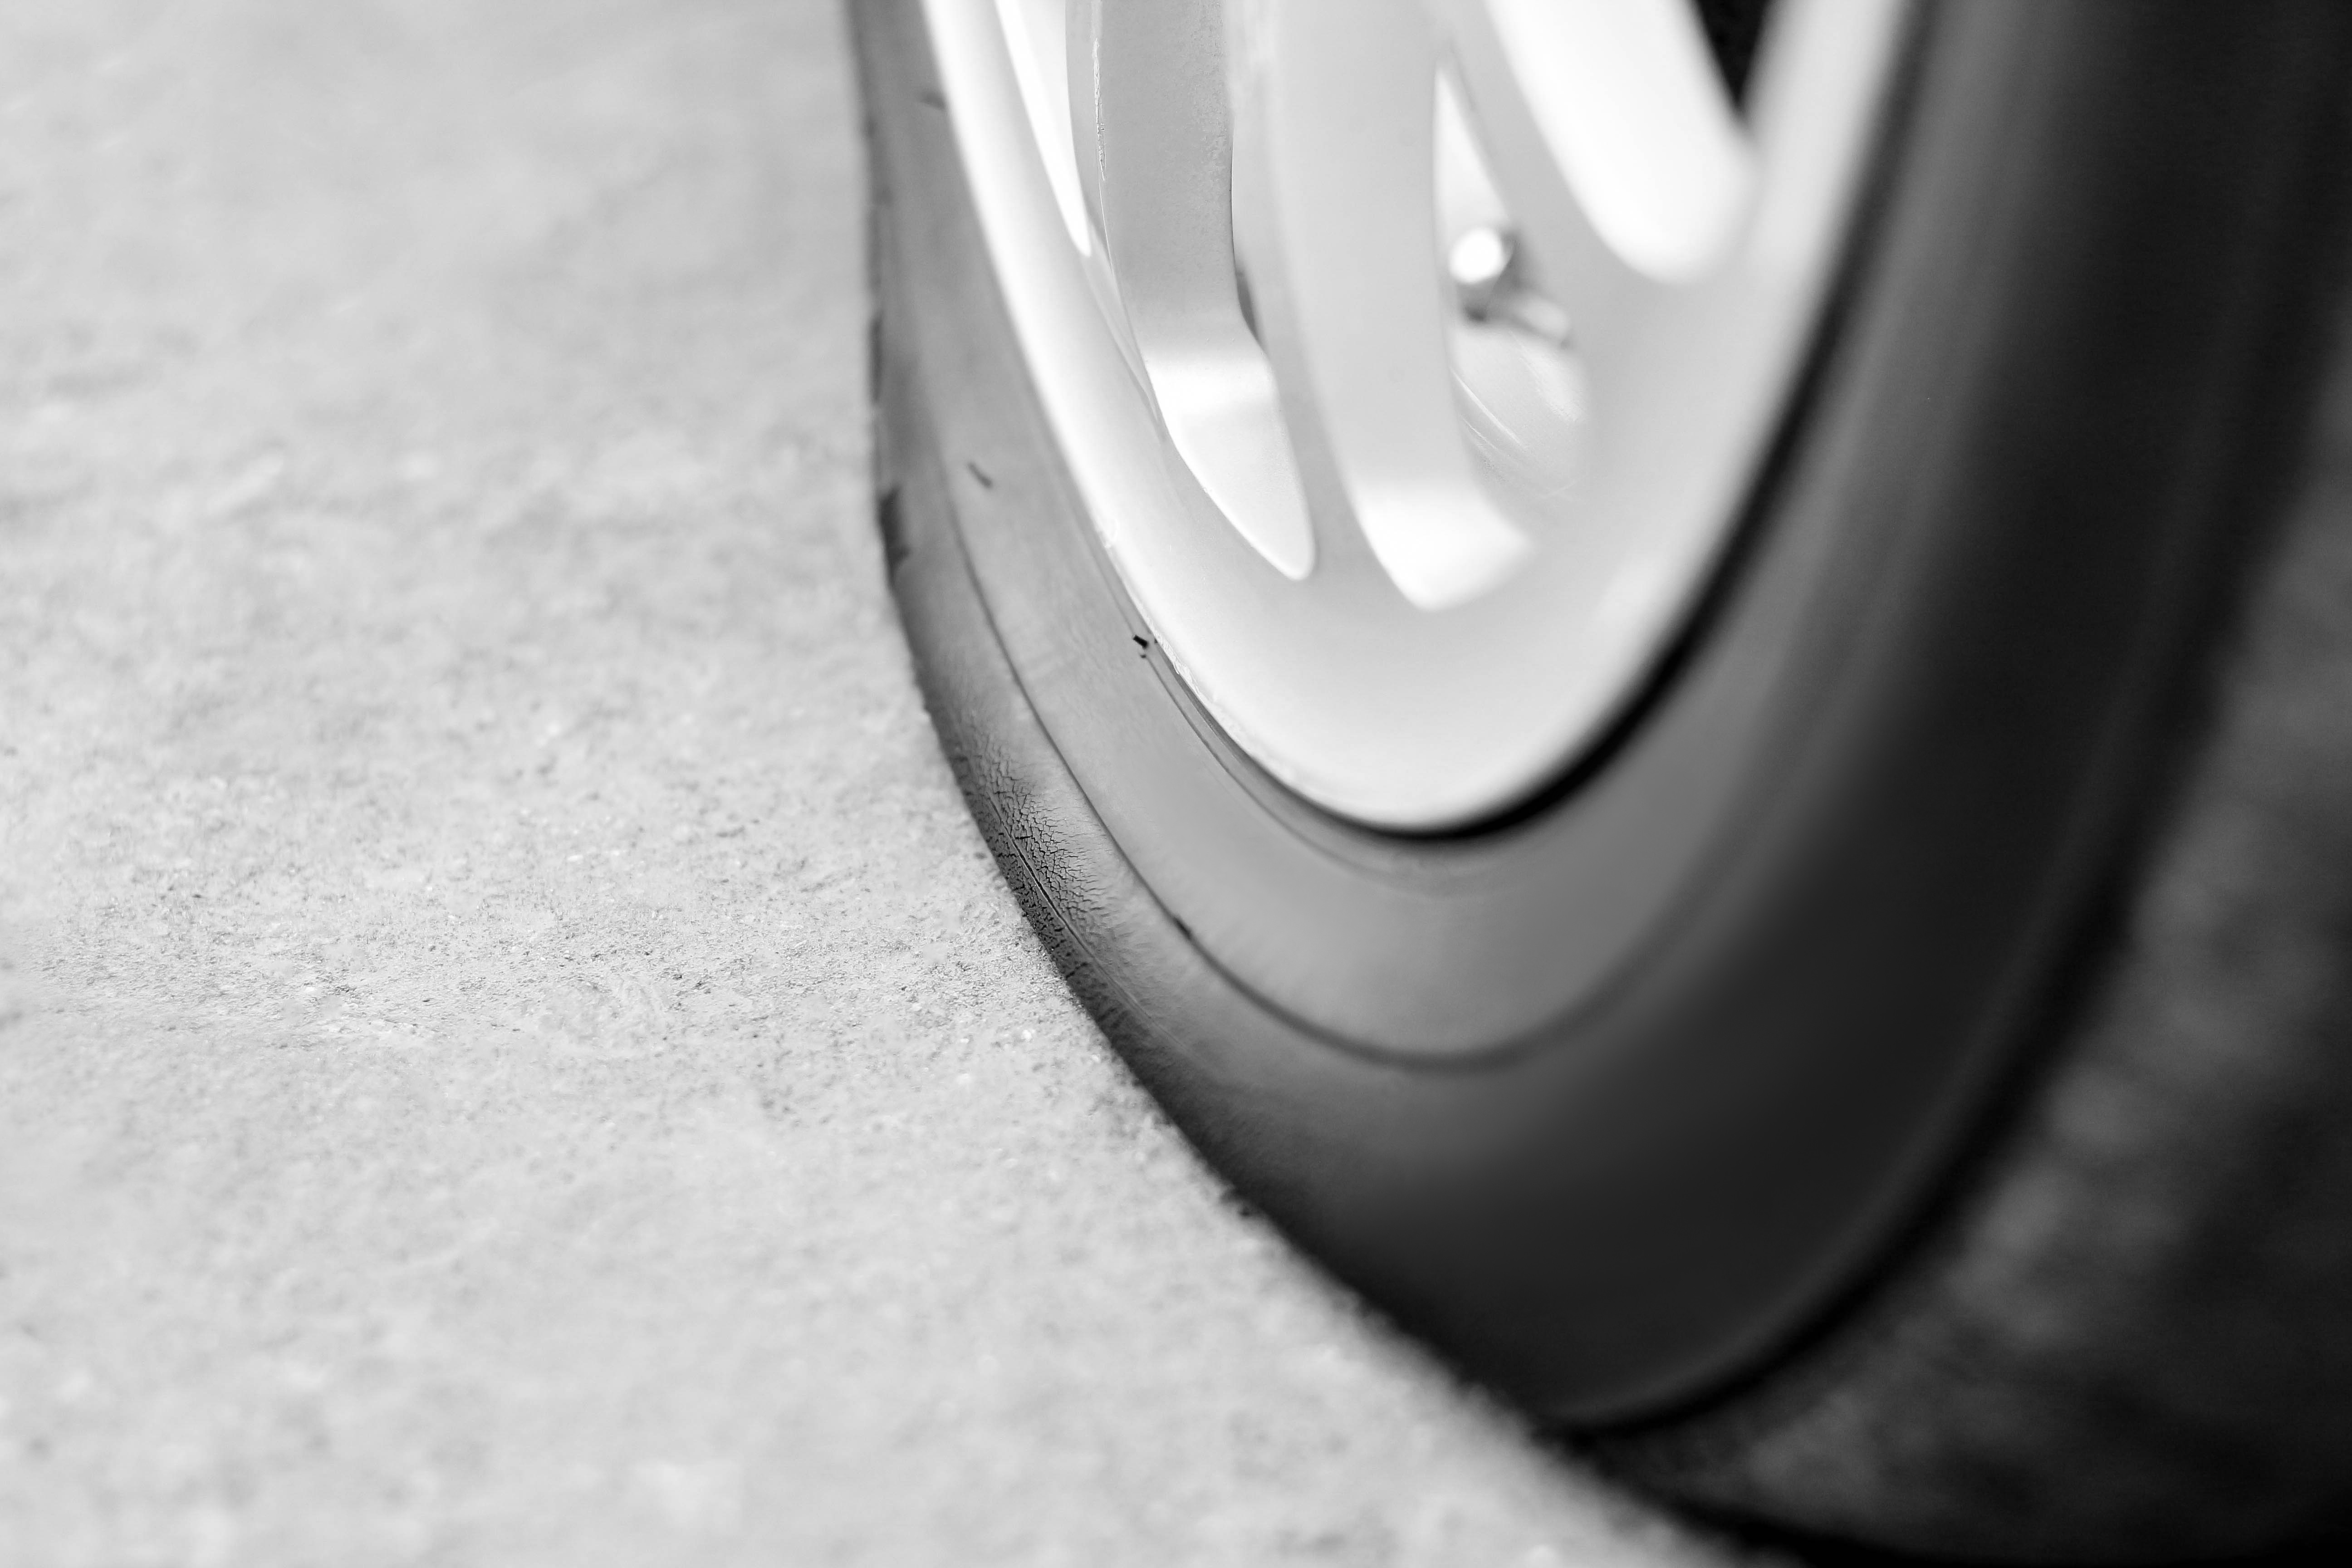  Is Your Tire Leaking With No Sign of a Puncture? You Might Want to Check Your Valve Stem.